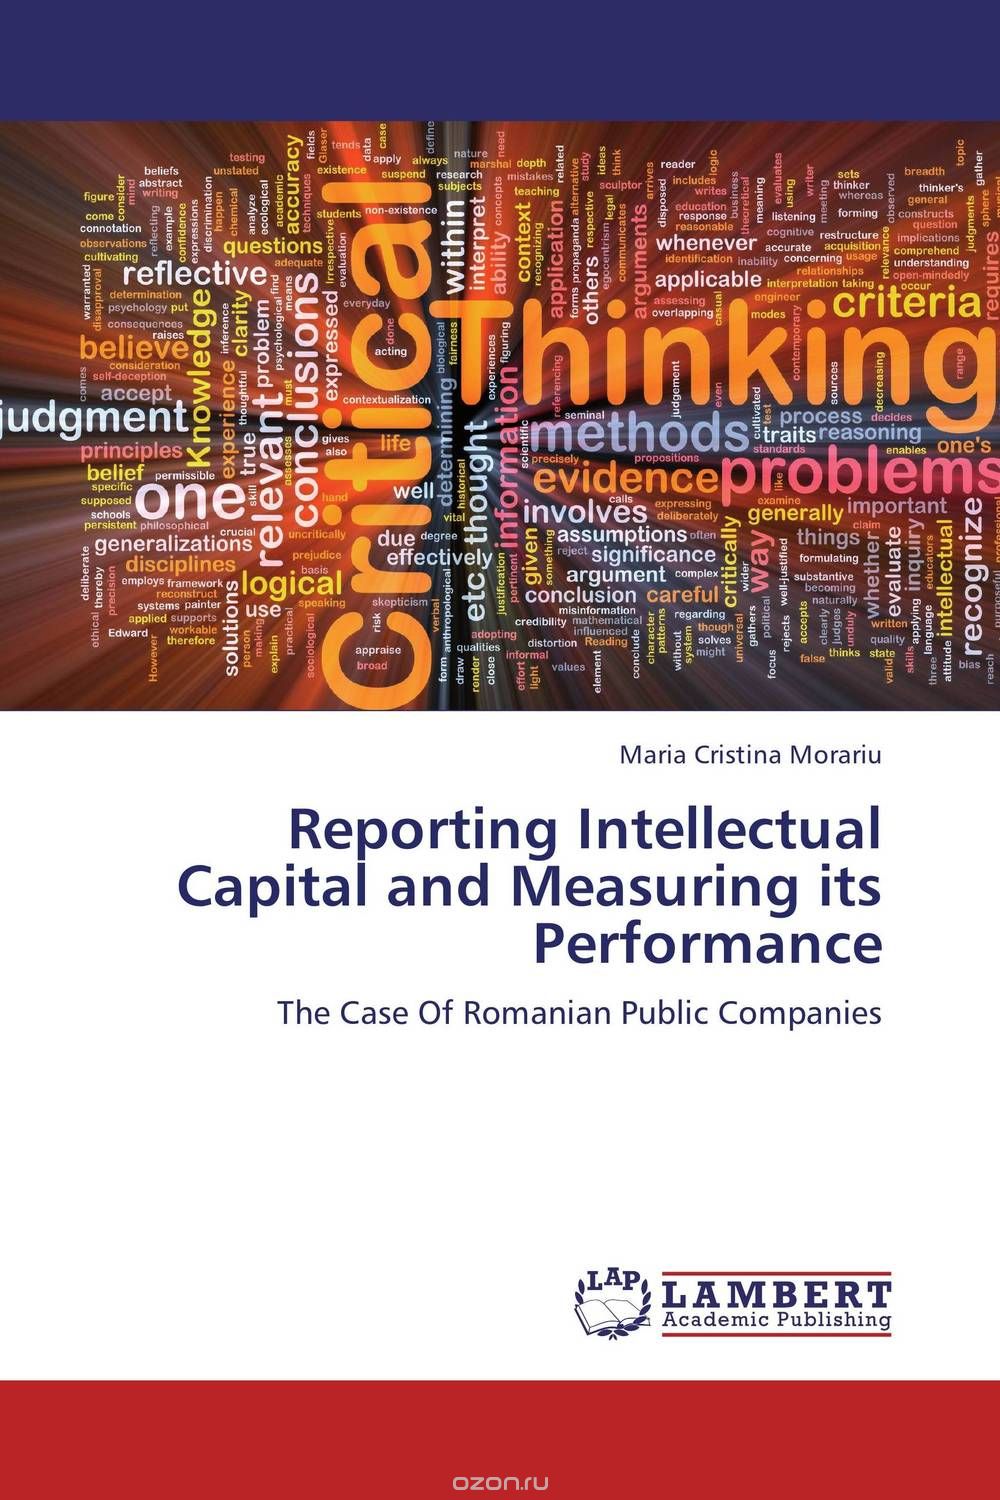 Reporting Intellectual Capital and Measuring its Performance